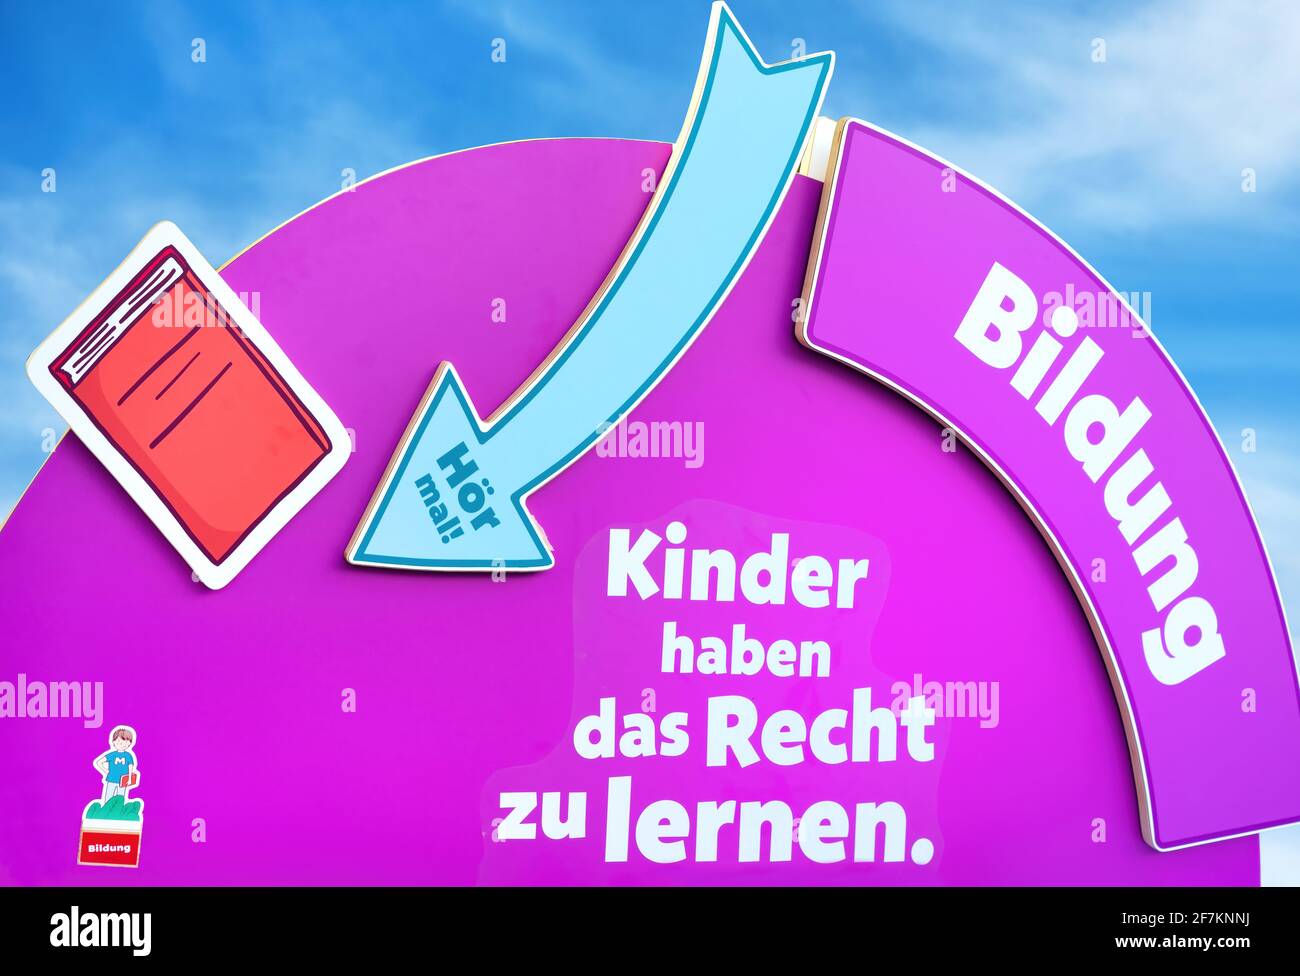 Poster with lettering: Bildung, Kinder haben das Recht zu lernen. Education, Children have the right to learn. Stock Photo